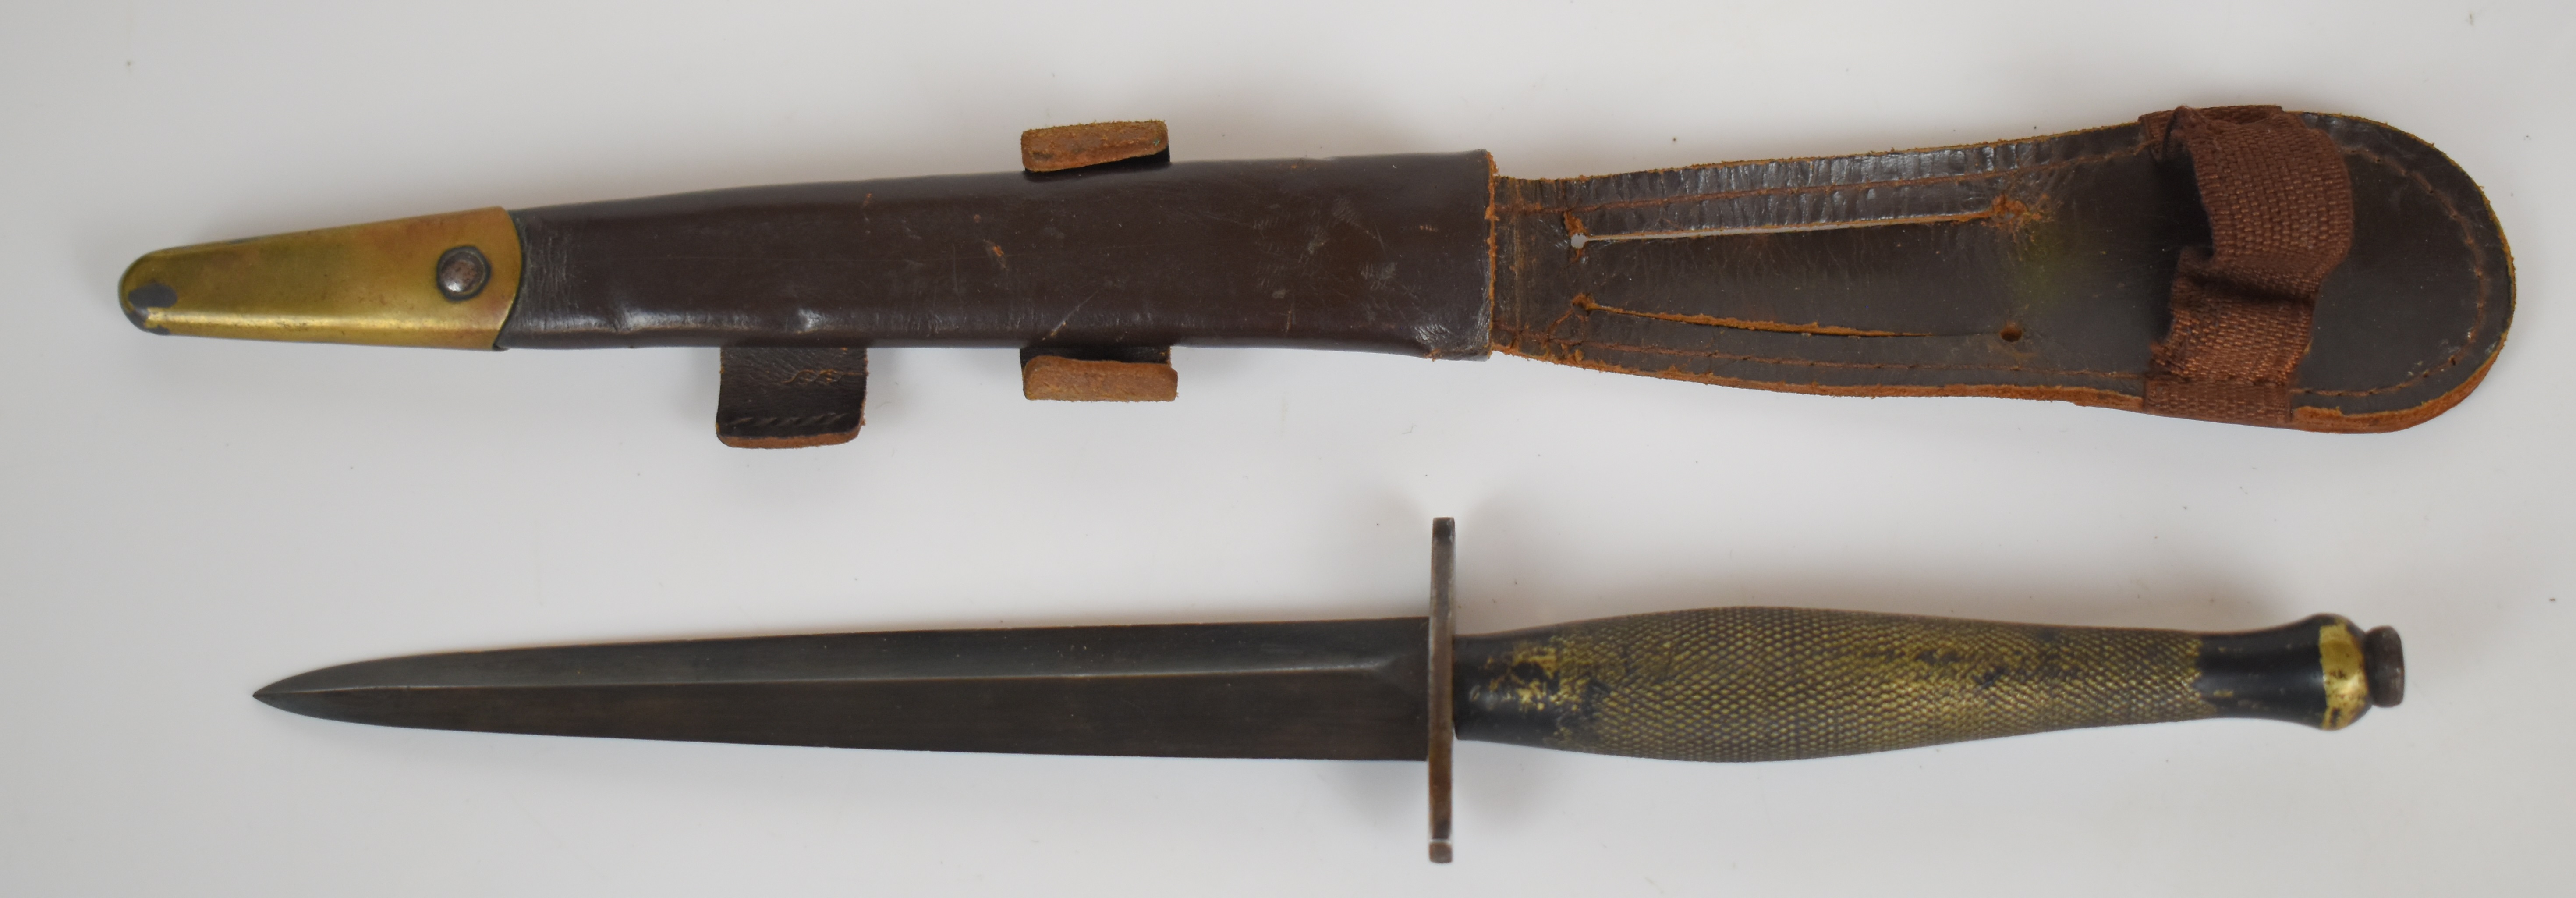 British WW2 Fairbairn Sykes 2nd pattern fighting knife stamped 82 to cross guard, with 16cm blade - Image 3 of 4